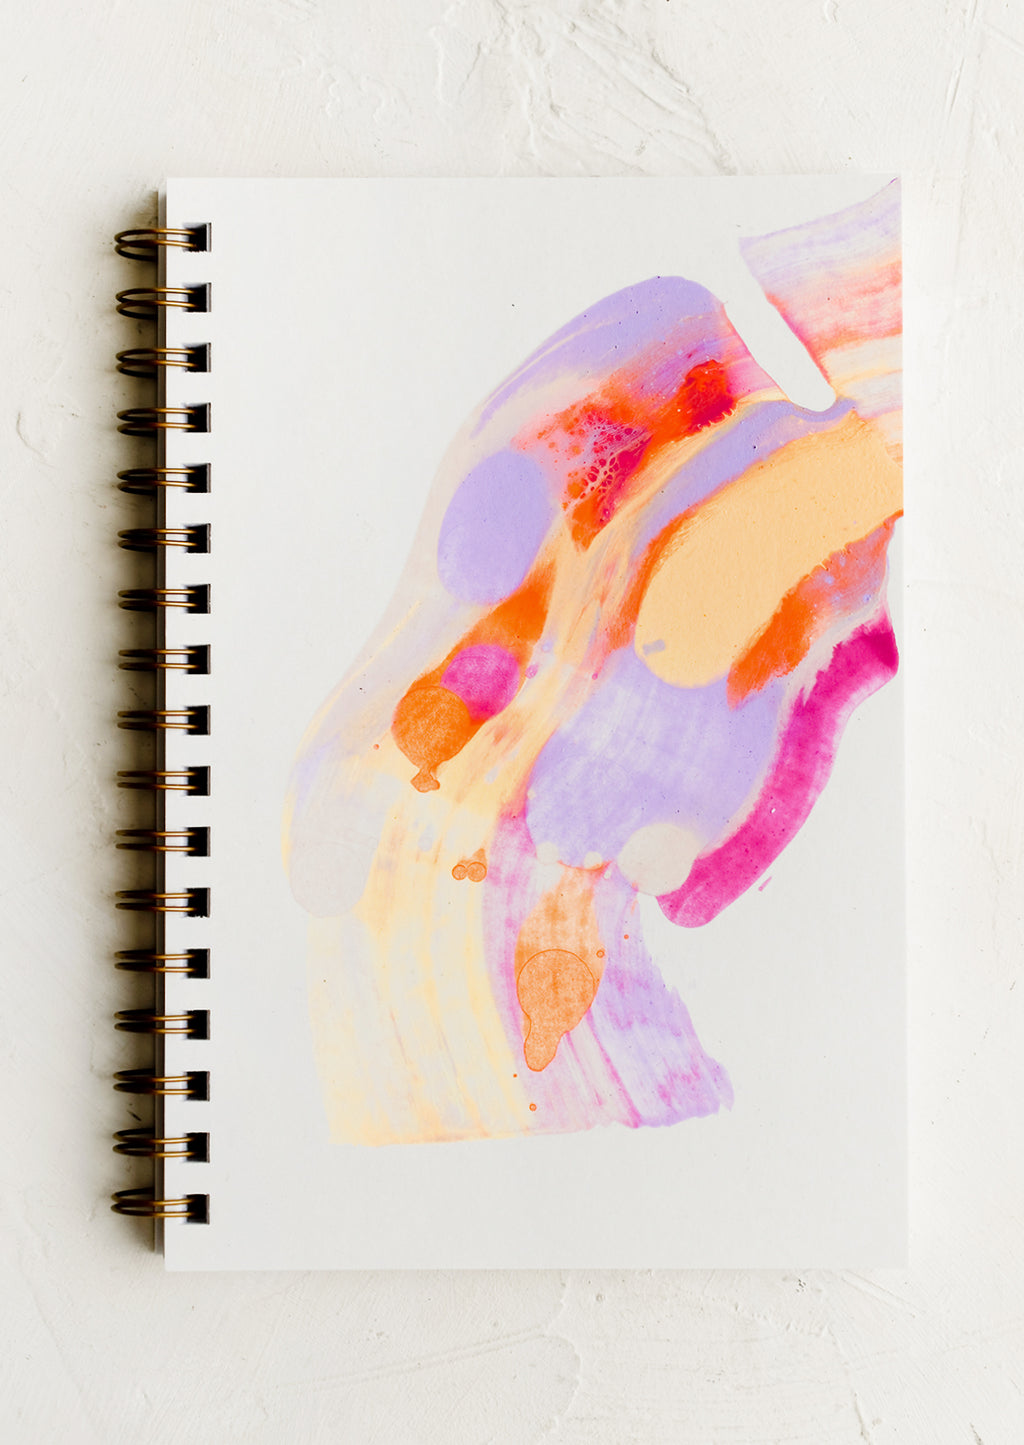 Notebook (Unruled): A paint swirl decorated notebook.